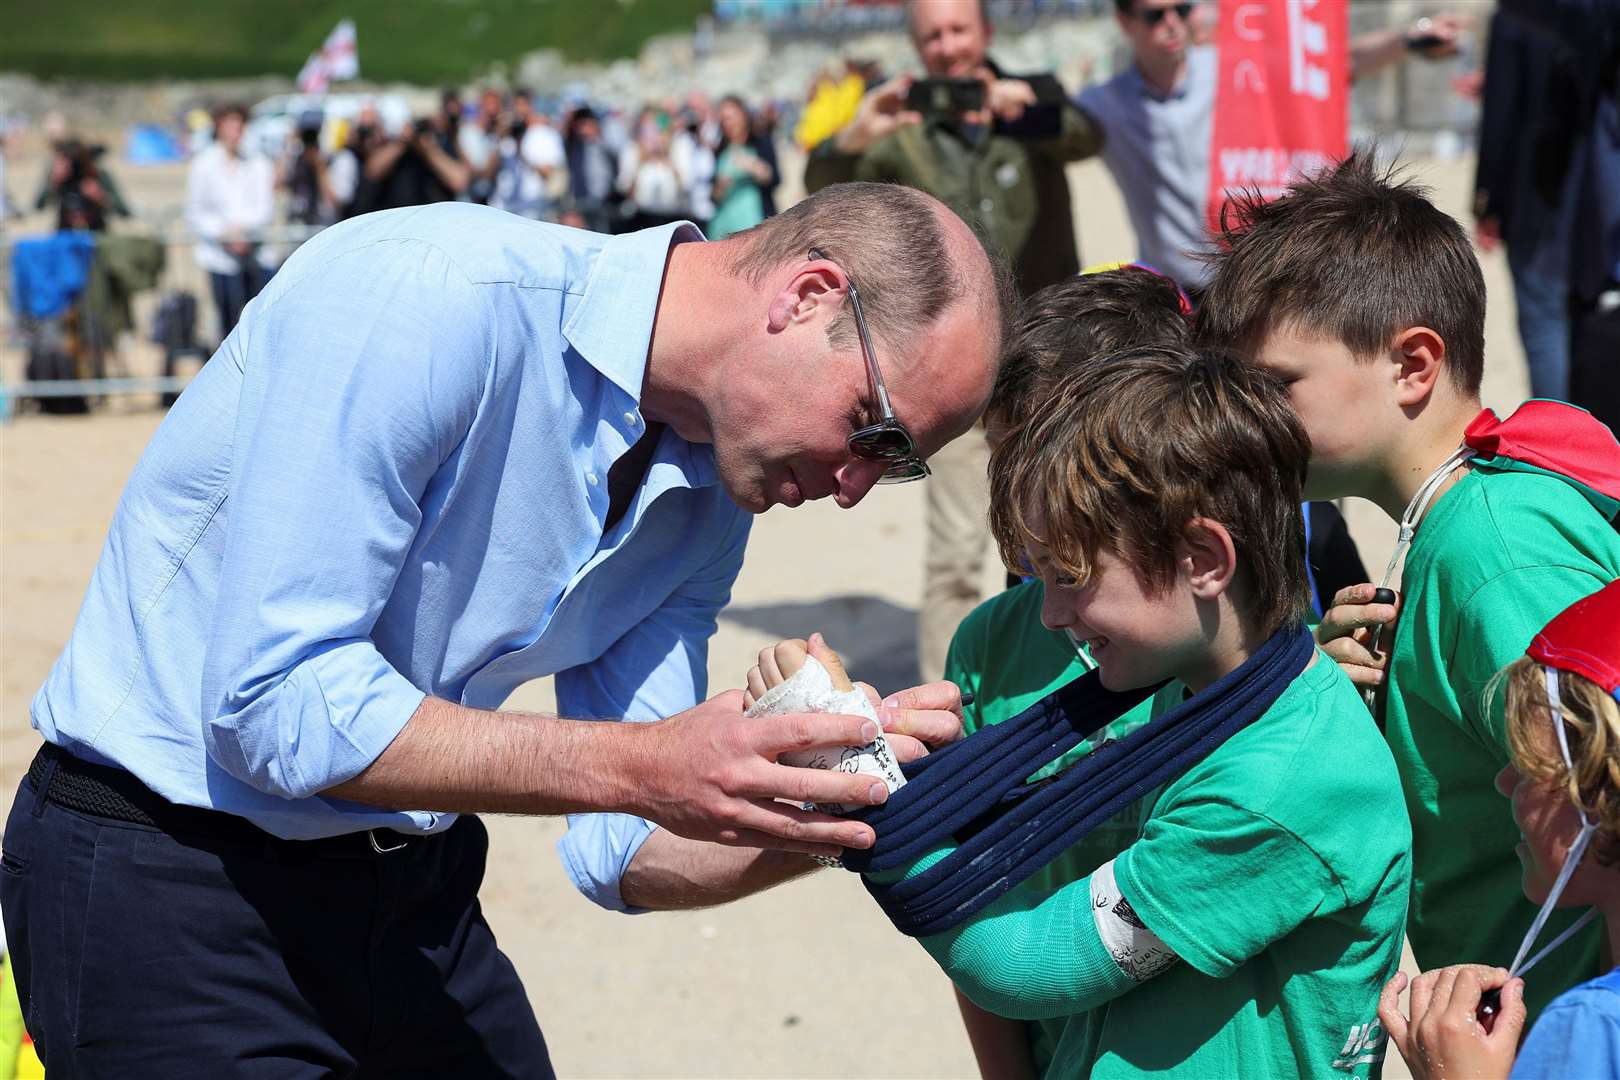 William signs the cast of Felix Kanes, a member of Holywell Bay Surf Life Saving Club (Toby Melville/PA)